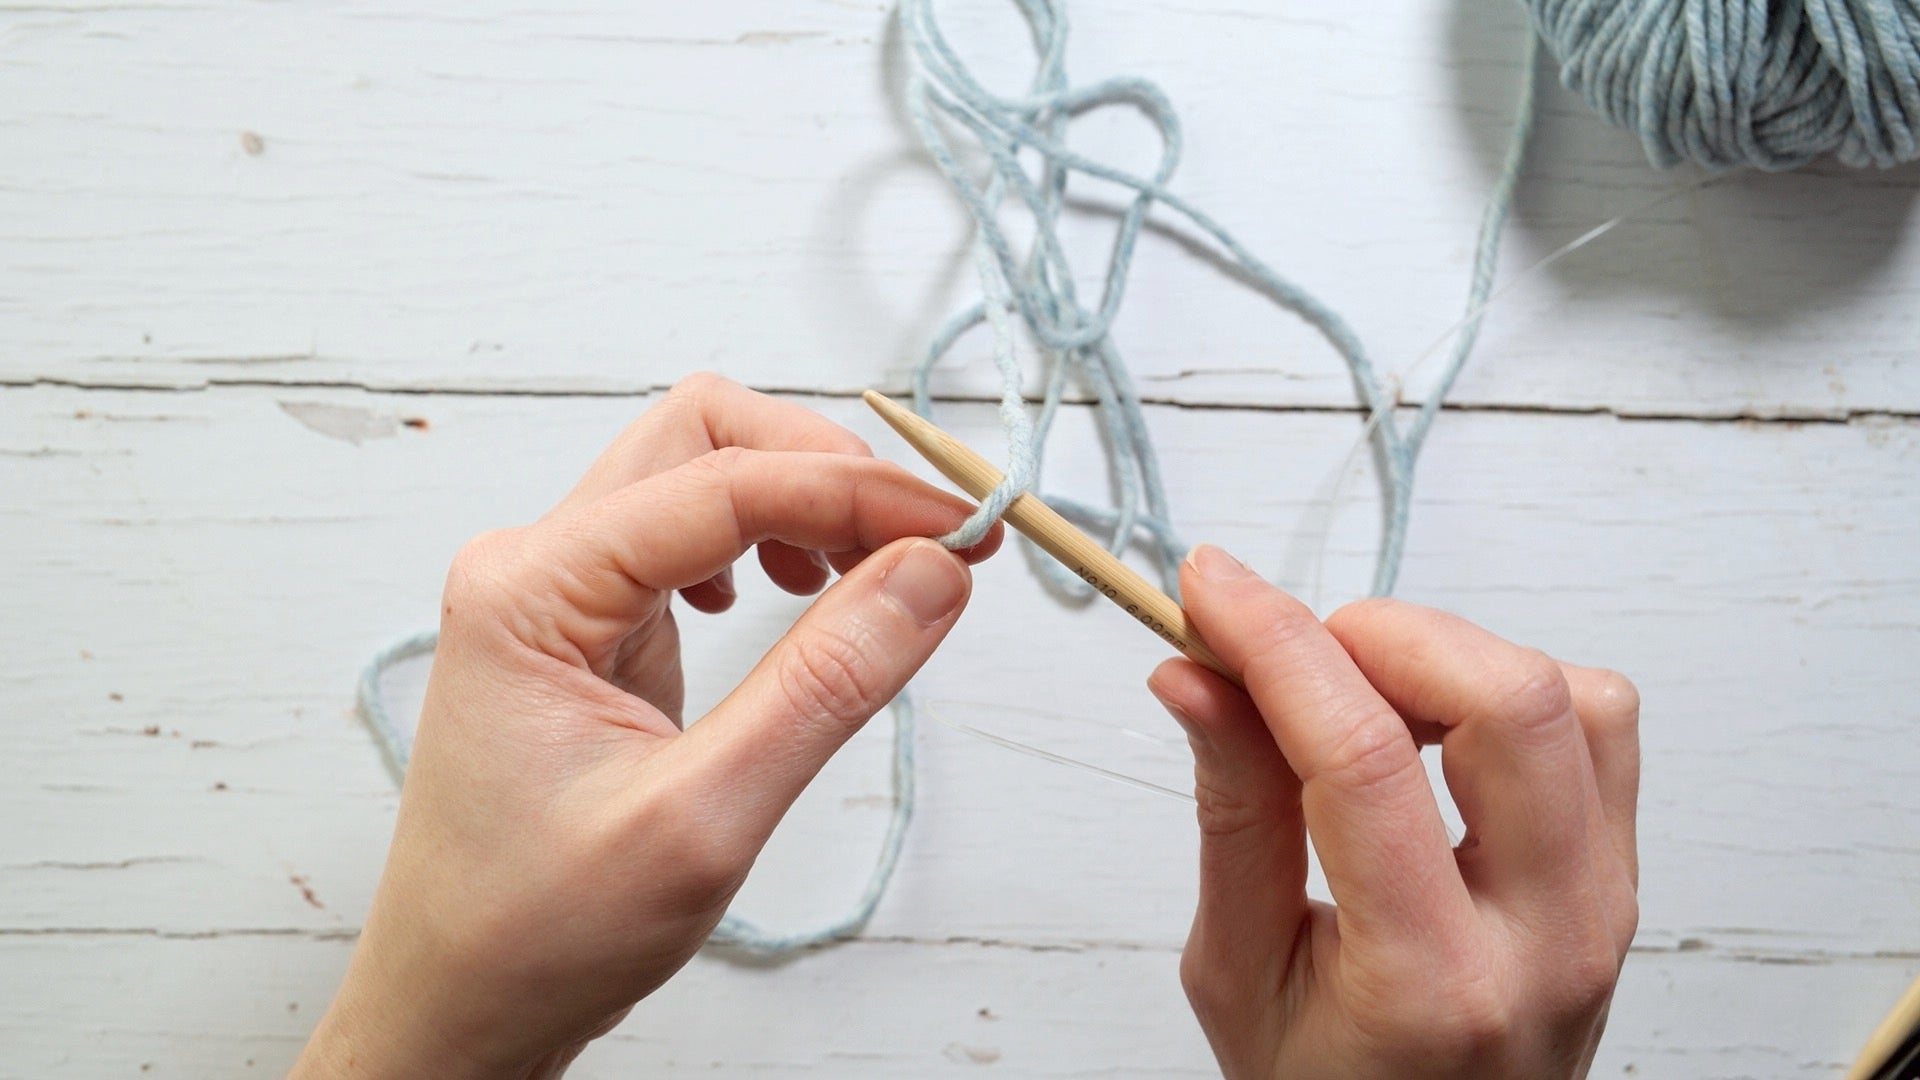 a knitting needle is held in the right hand, with the yarn draped over it